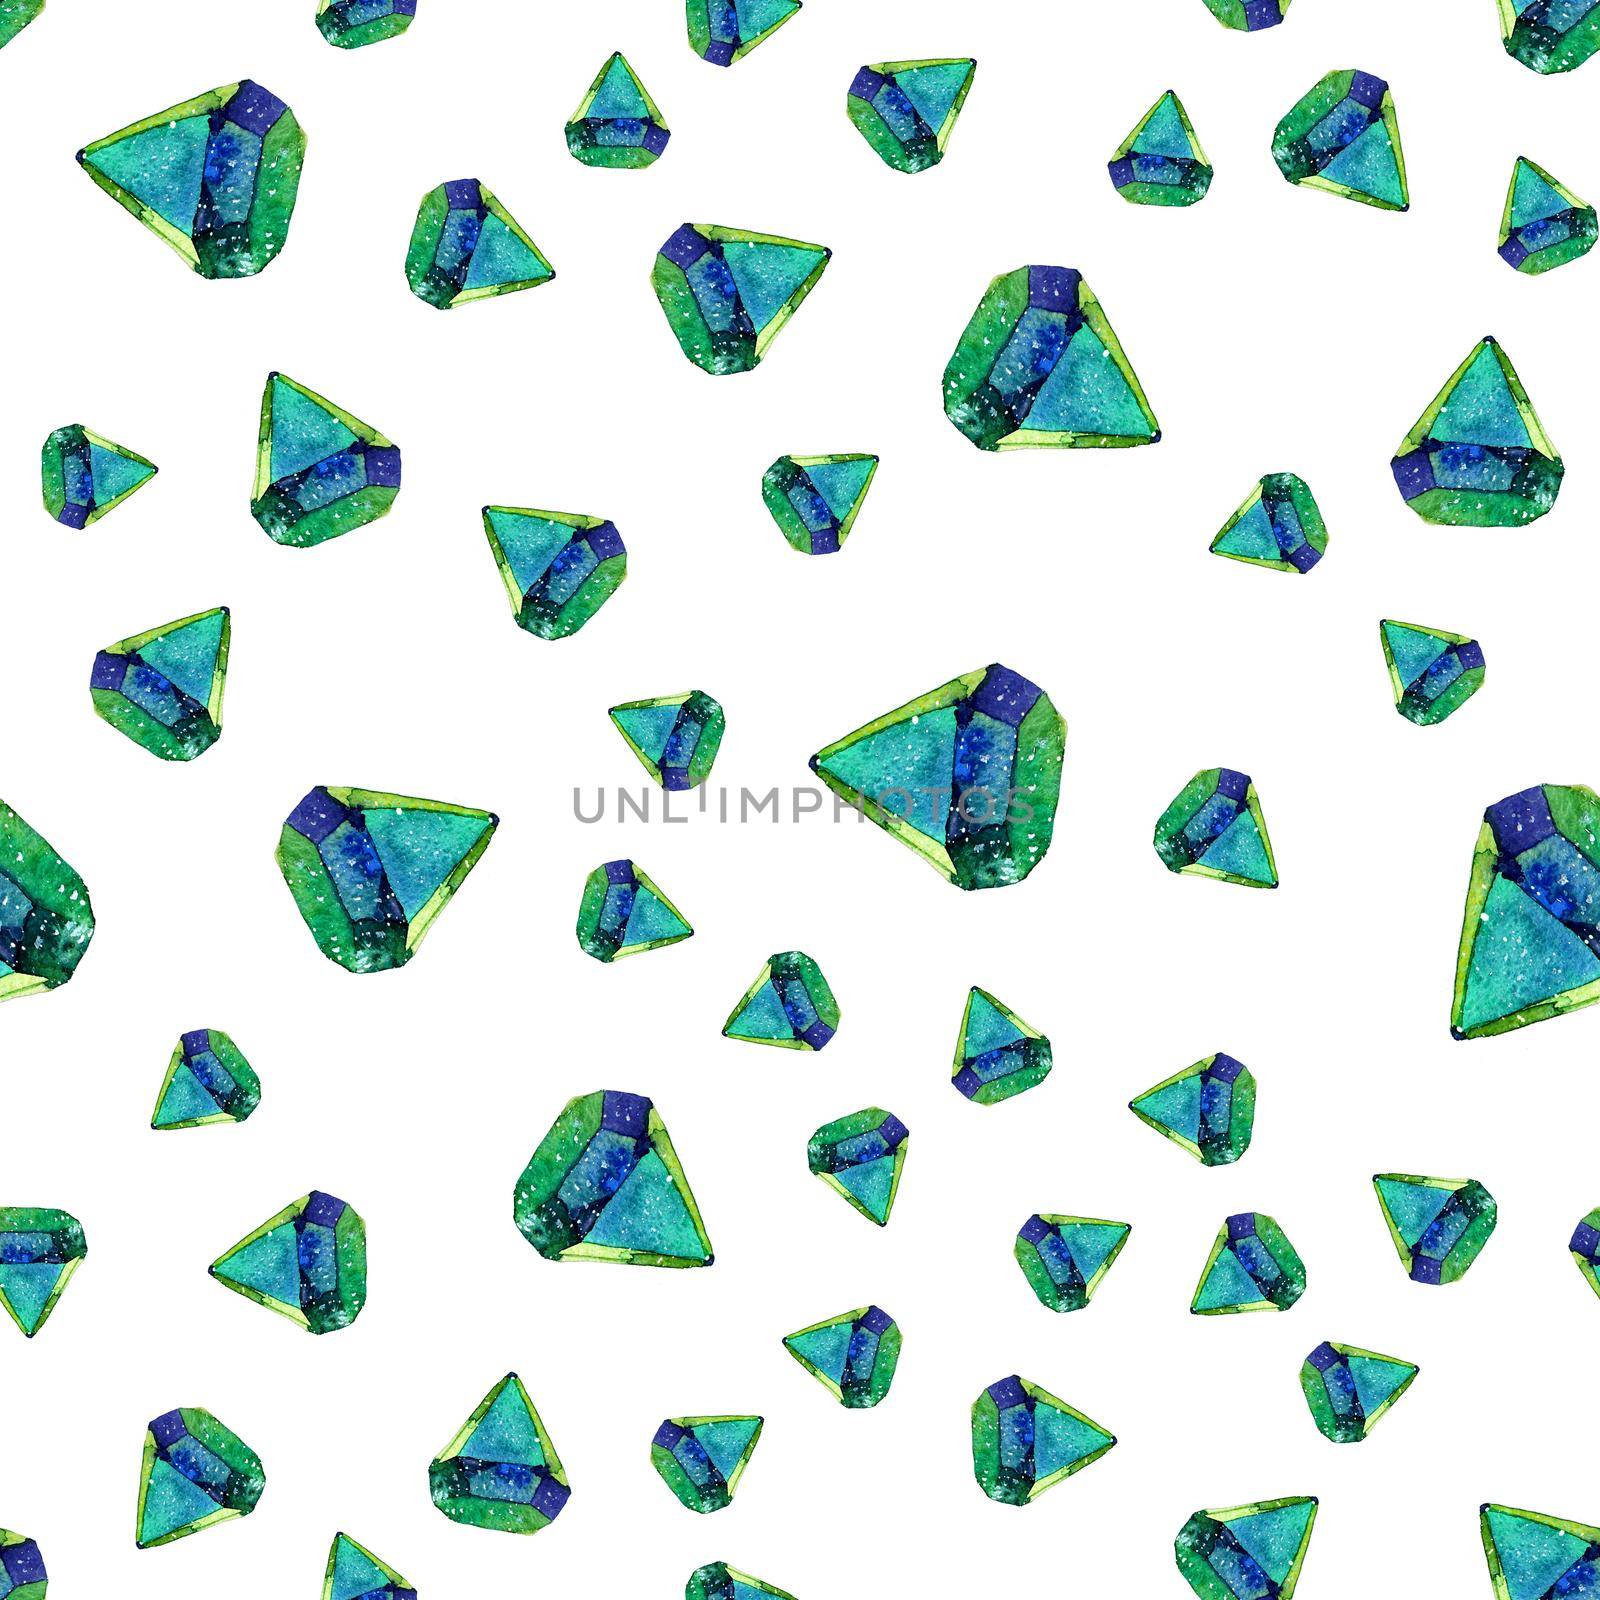 Watercolor illustration of diamond crystals - seamless pattern. Print for textile, fabric, wallpaper. Hand made painting. Jewel on white background. Unusual modern ornate.